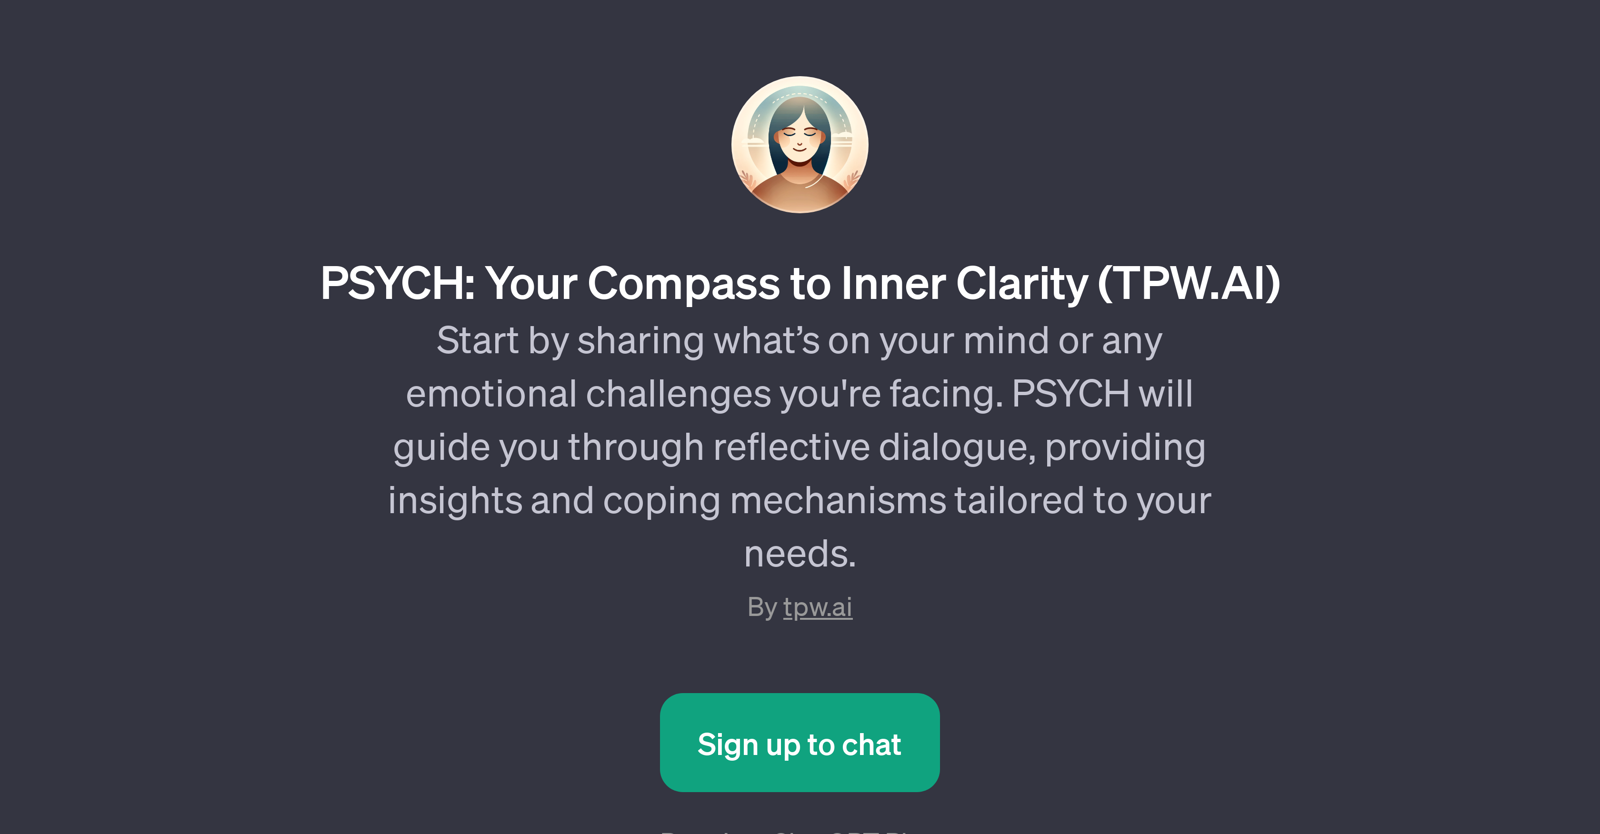 PSYCH: Your Compass to Inner Clarity (TPW.AI) website